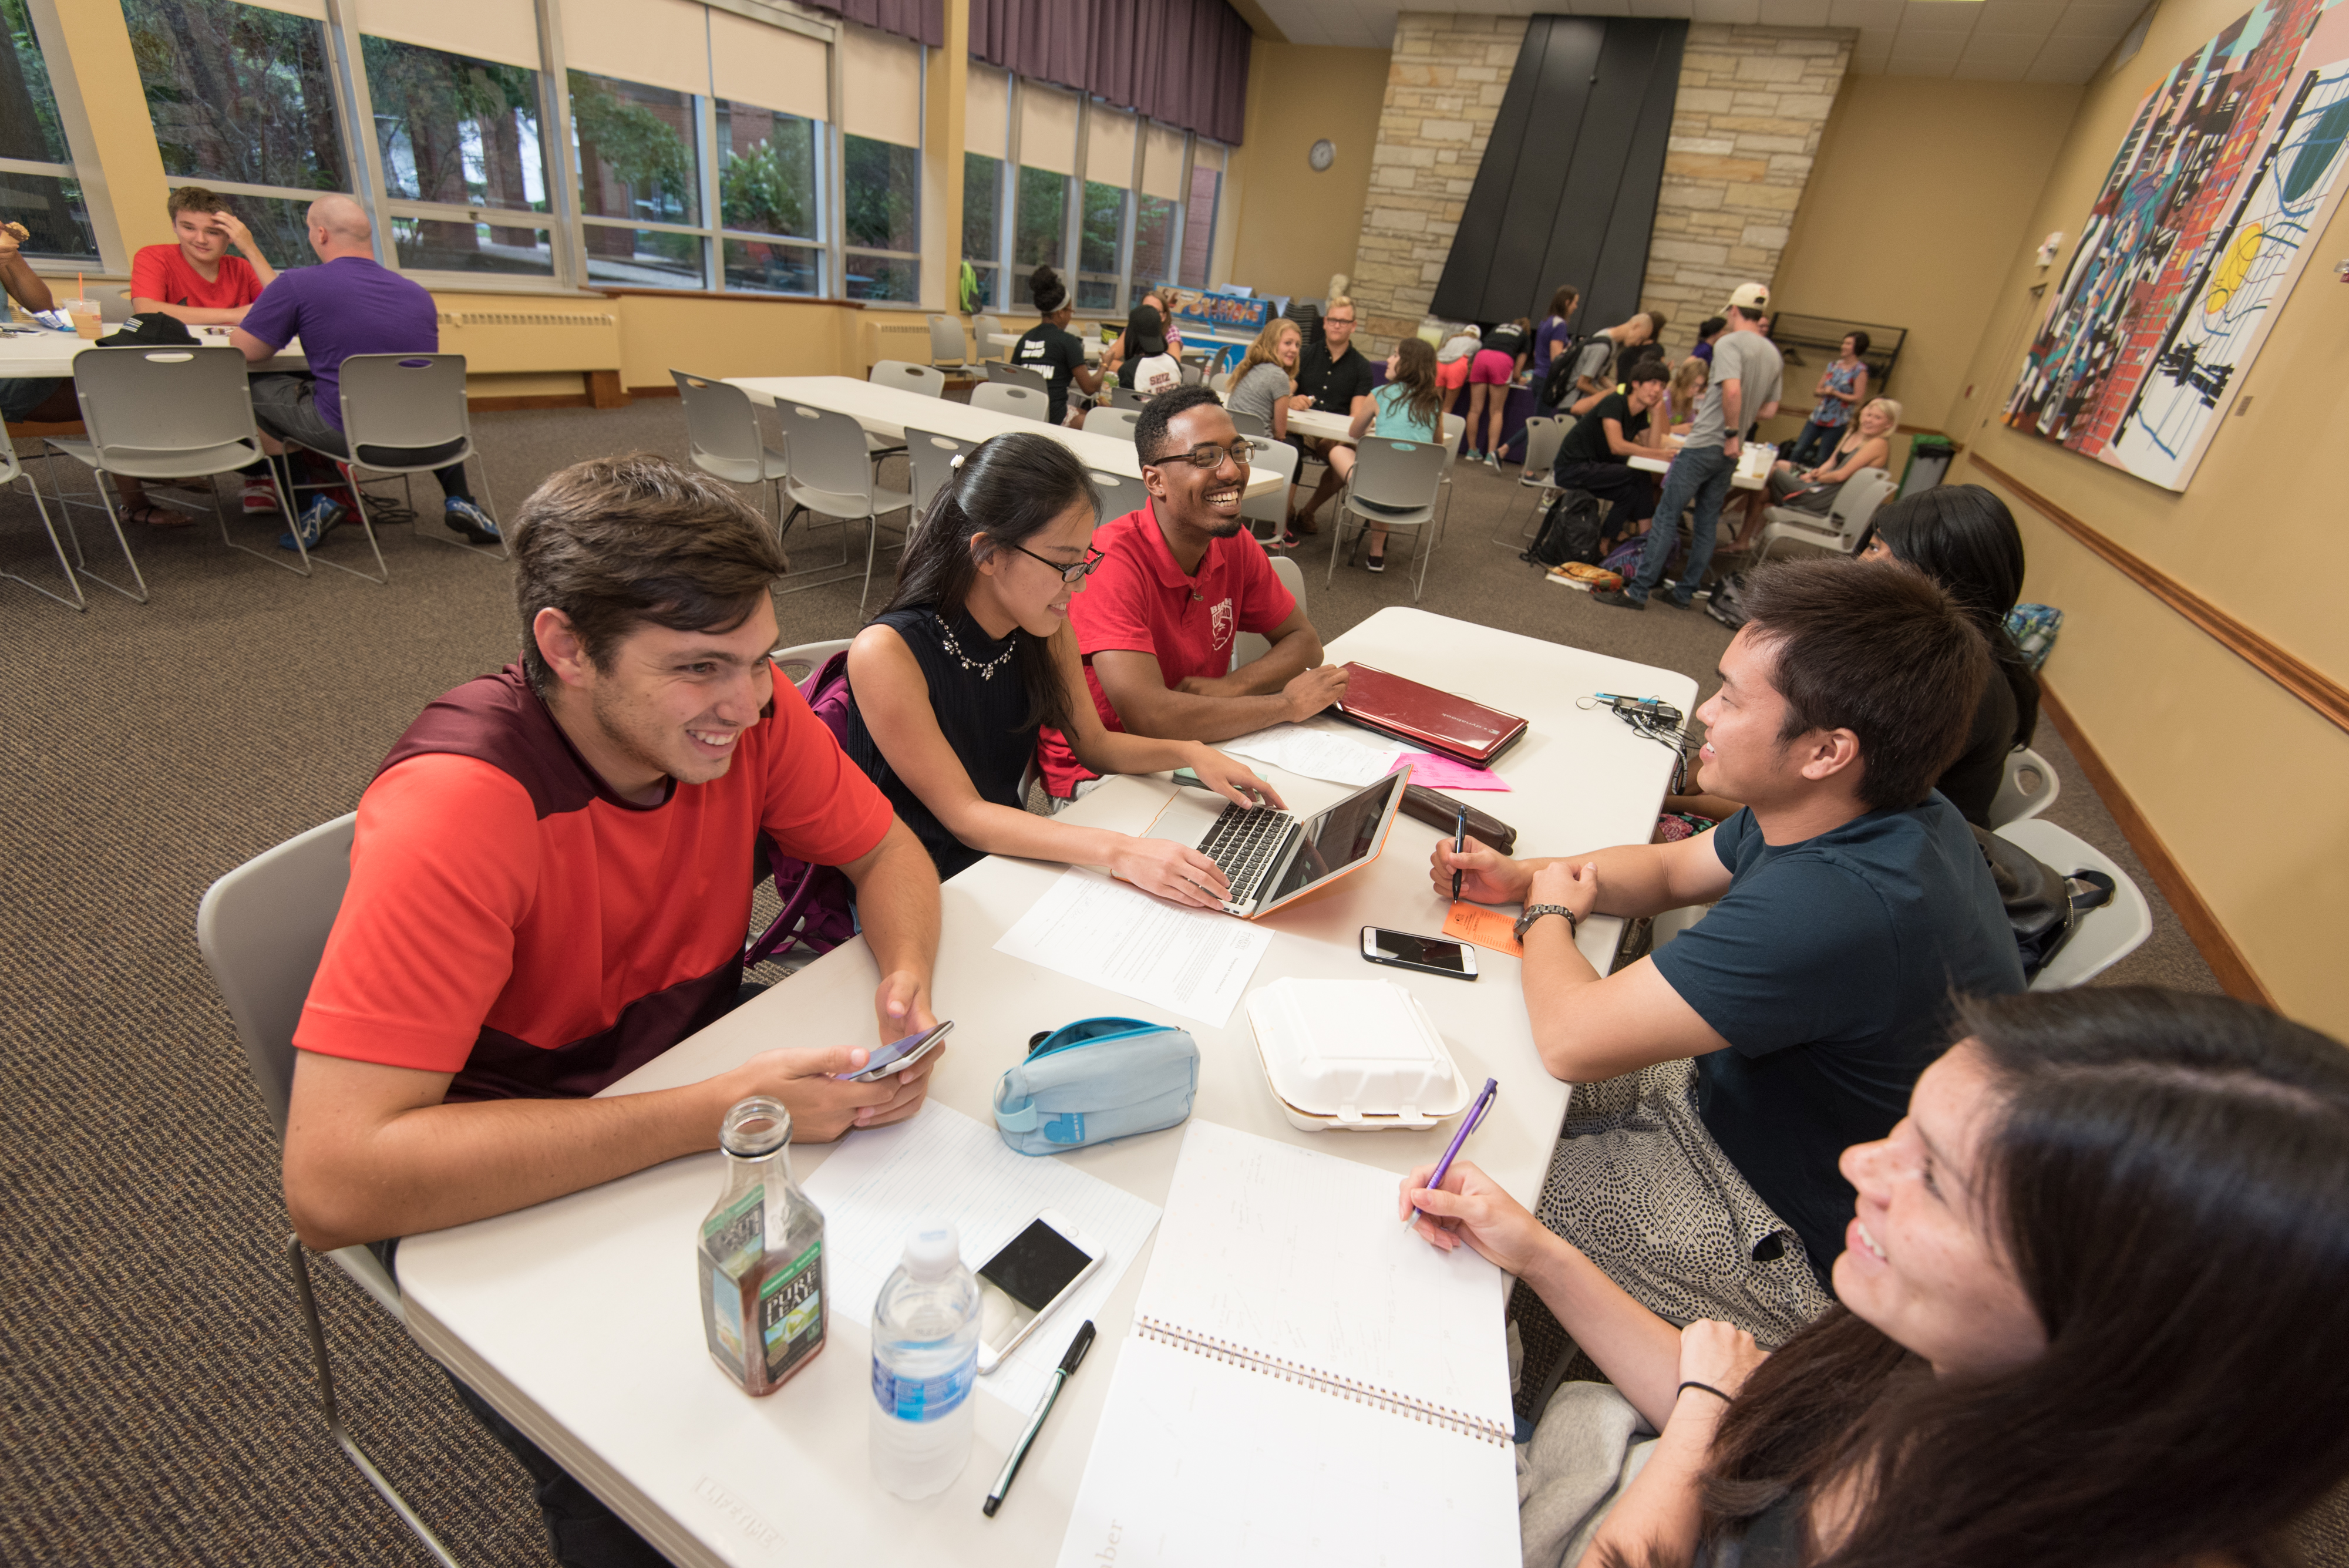 University of Mount Union students in meeting